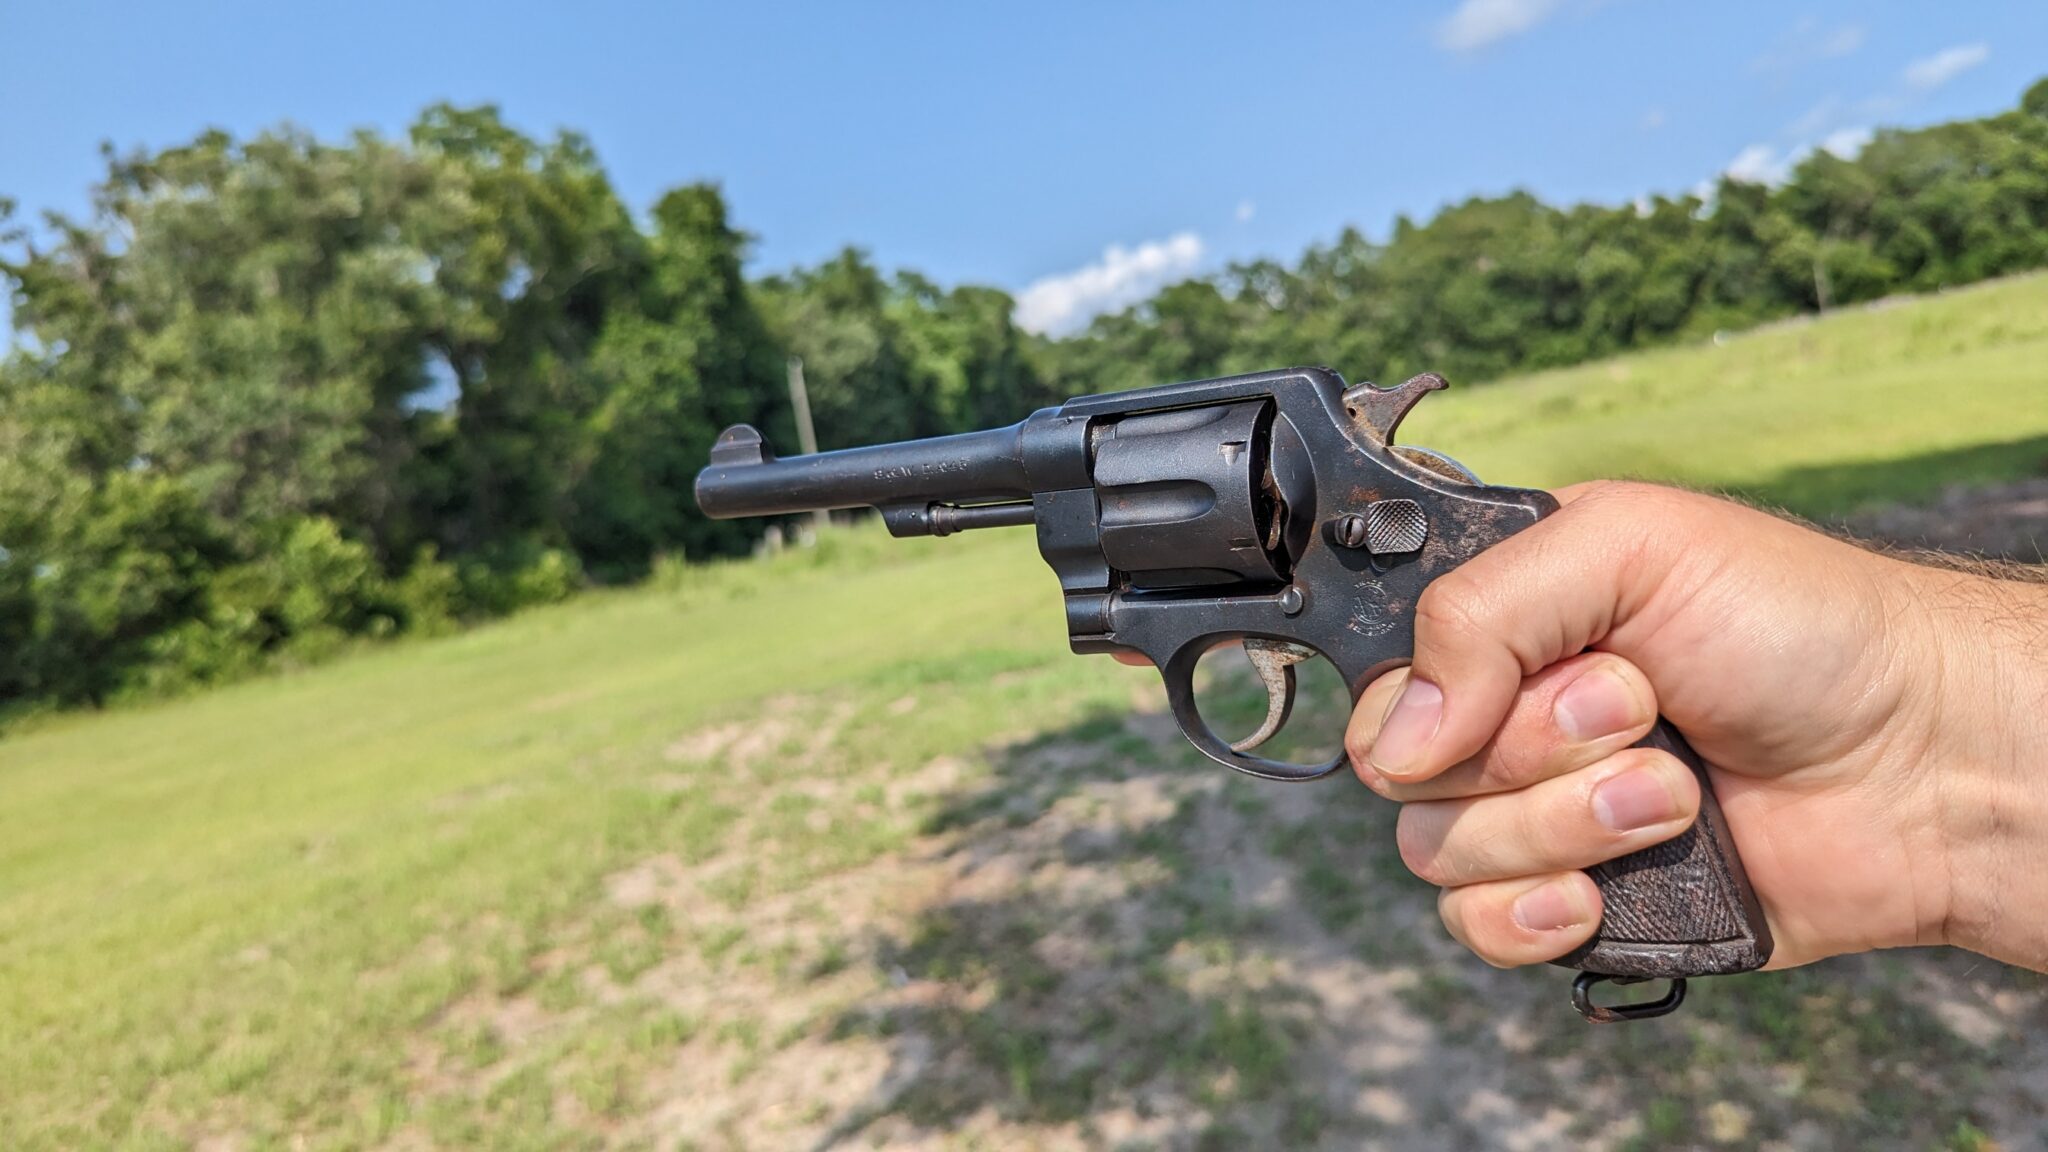 Sandboxx  Hands-on with an S&W M1917 revolver - the weapon that